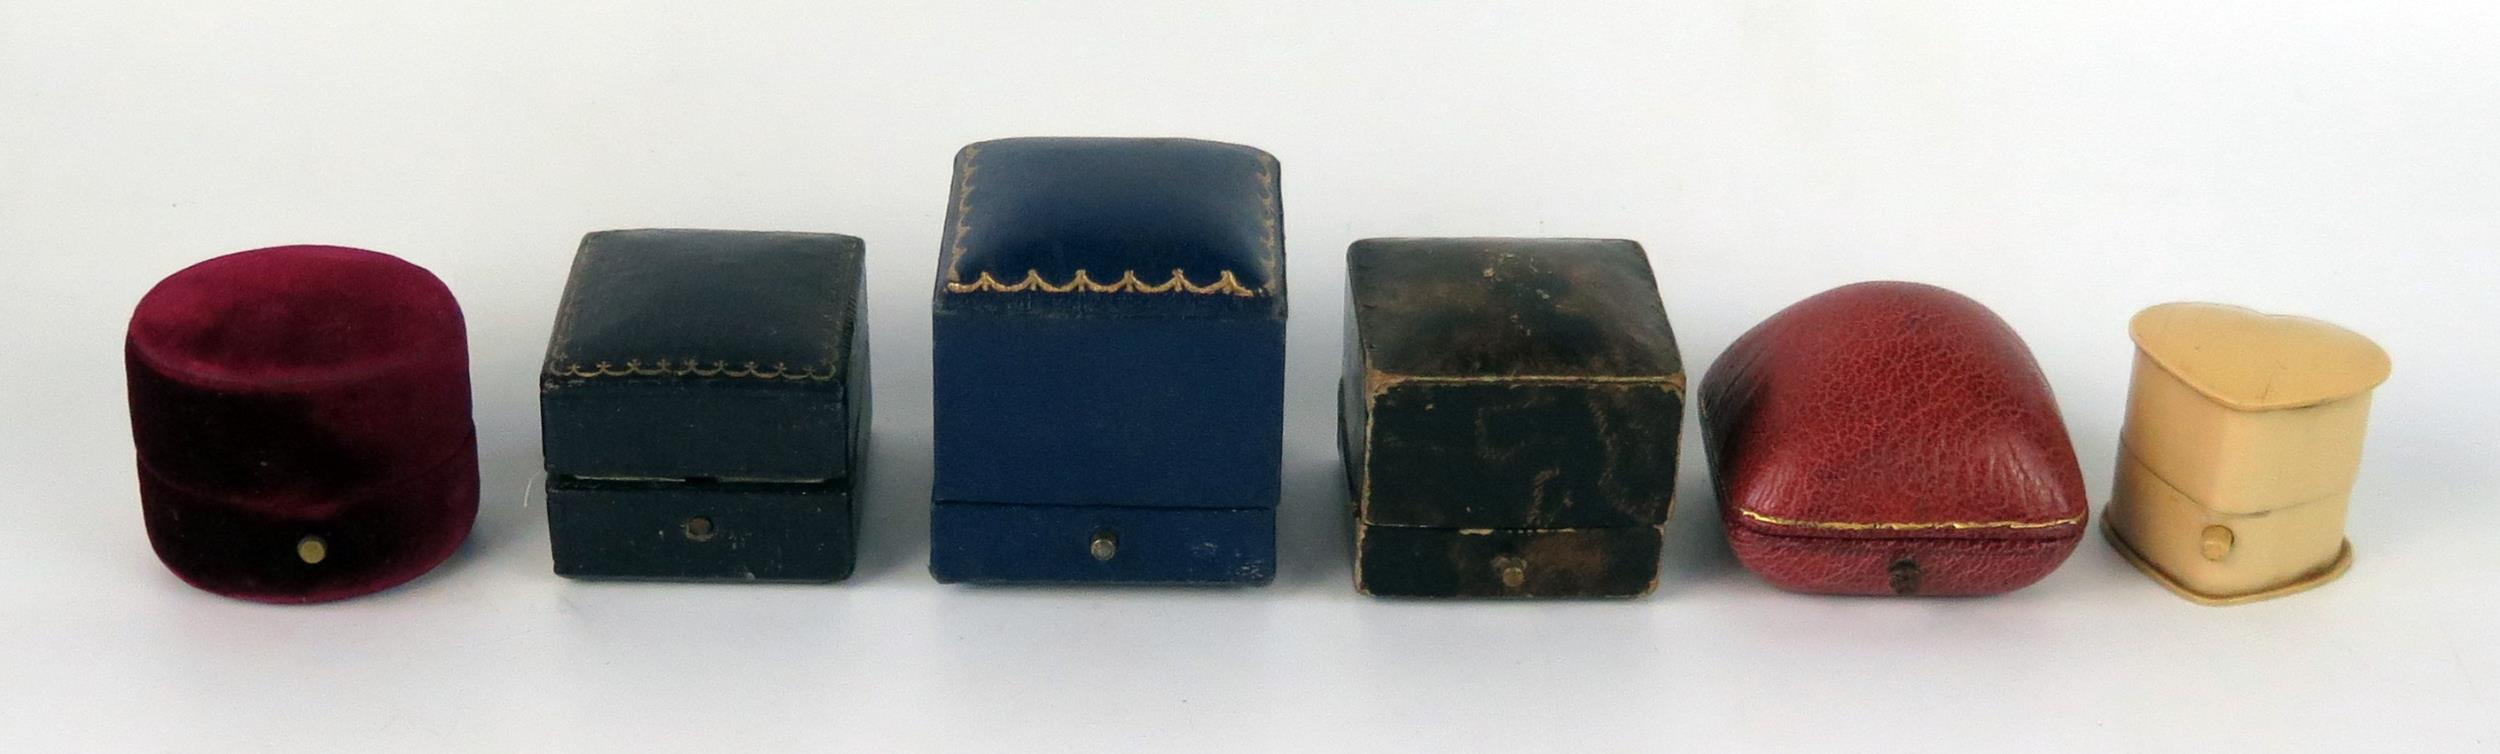 Six Vintage Ring Boxes _ all named including Mappin & Webb and Watherston & Son